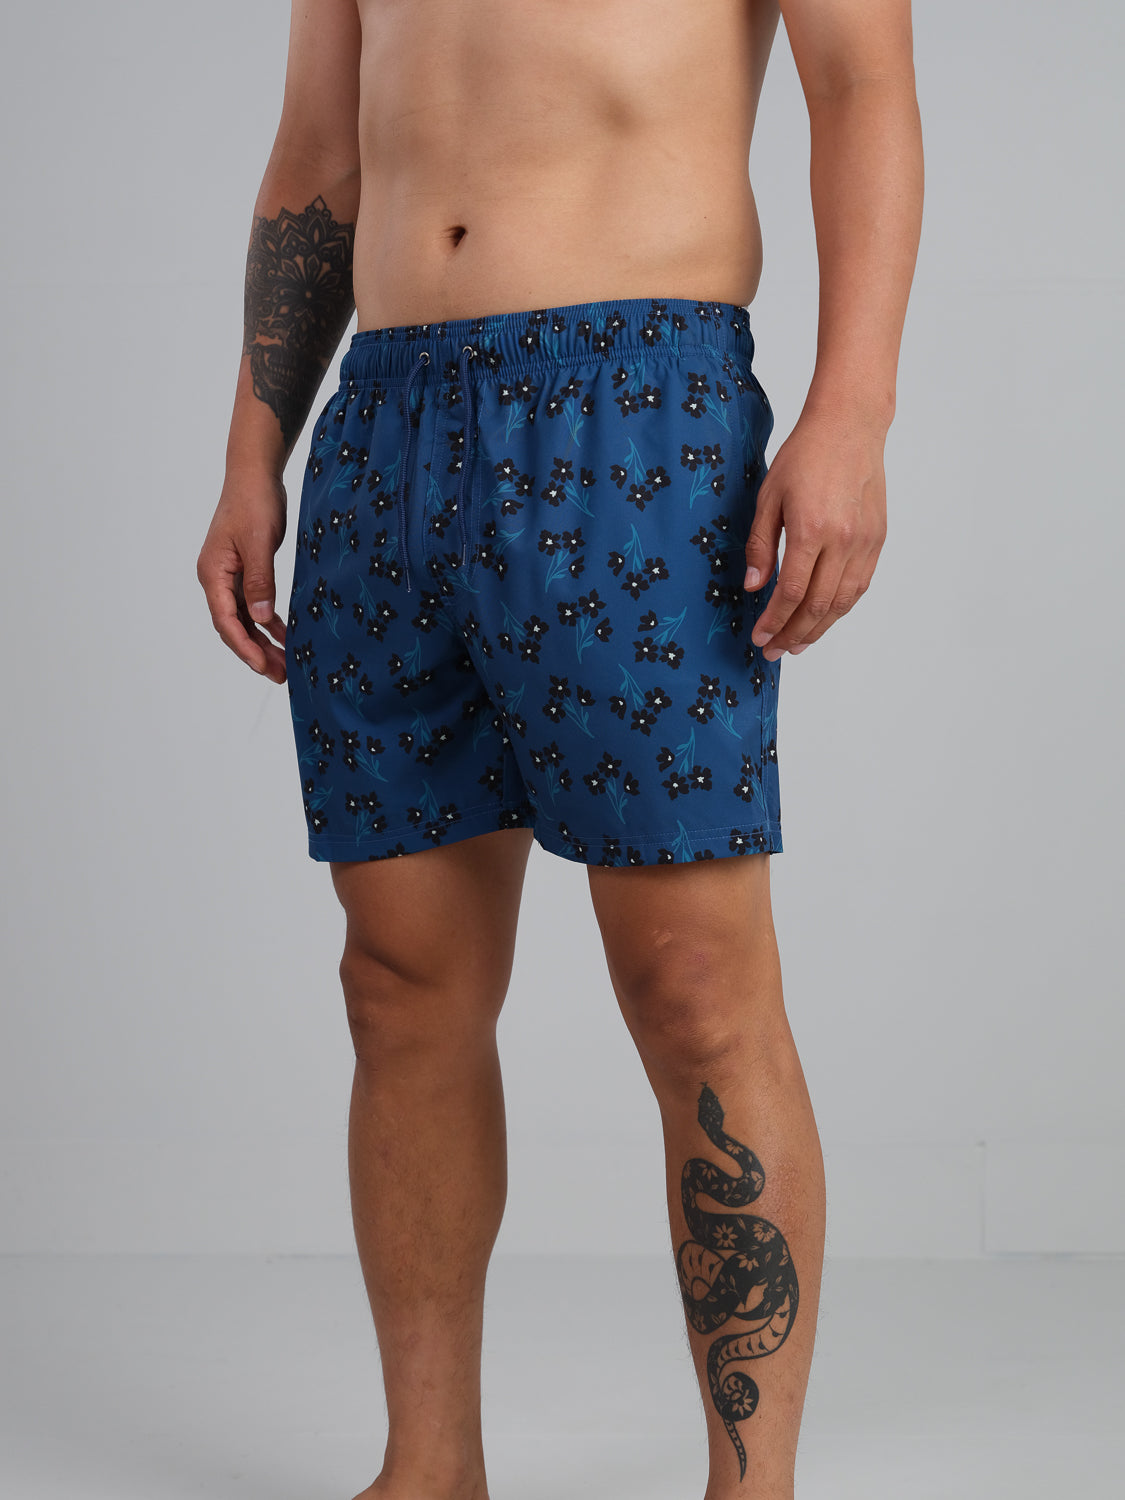 Daffodil Floral Printed Swim Trunk with Fast Dry and Stretch